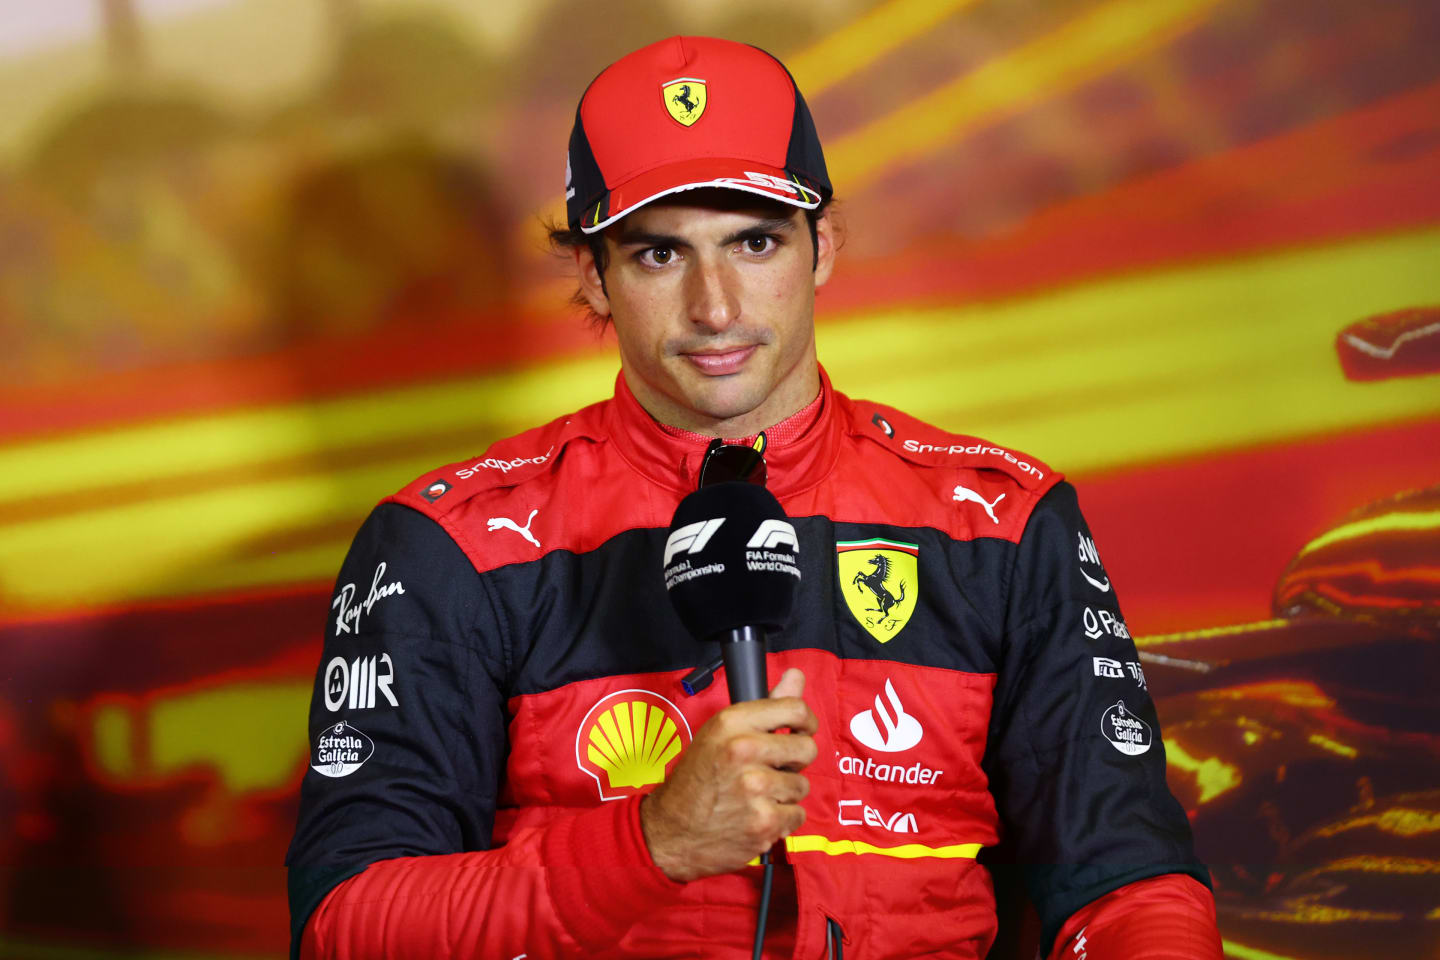 BARCELONA, SPAIN - MAY 21: Third placed qualifier Carlos Sainz of Spain and Ferrari talks in the press conference after qualifying ahead of the F1 Grand Prix of Spain at Circuit de Barcelona-Catalunya on May 21, 2022 in Barcelona, Spain. (Photo by Dan Istitene - Formula 1/Formula 1 via Getty Images)